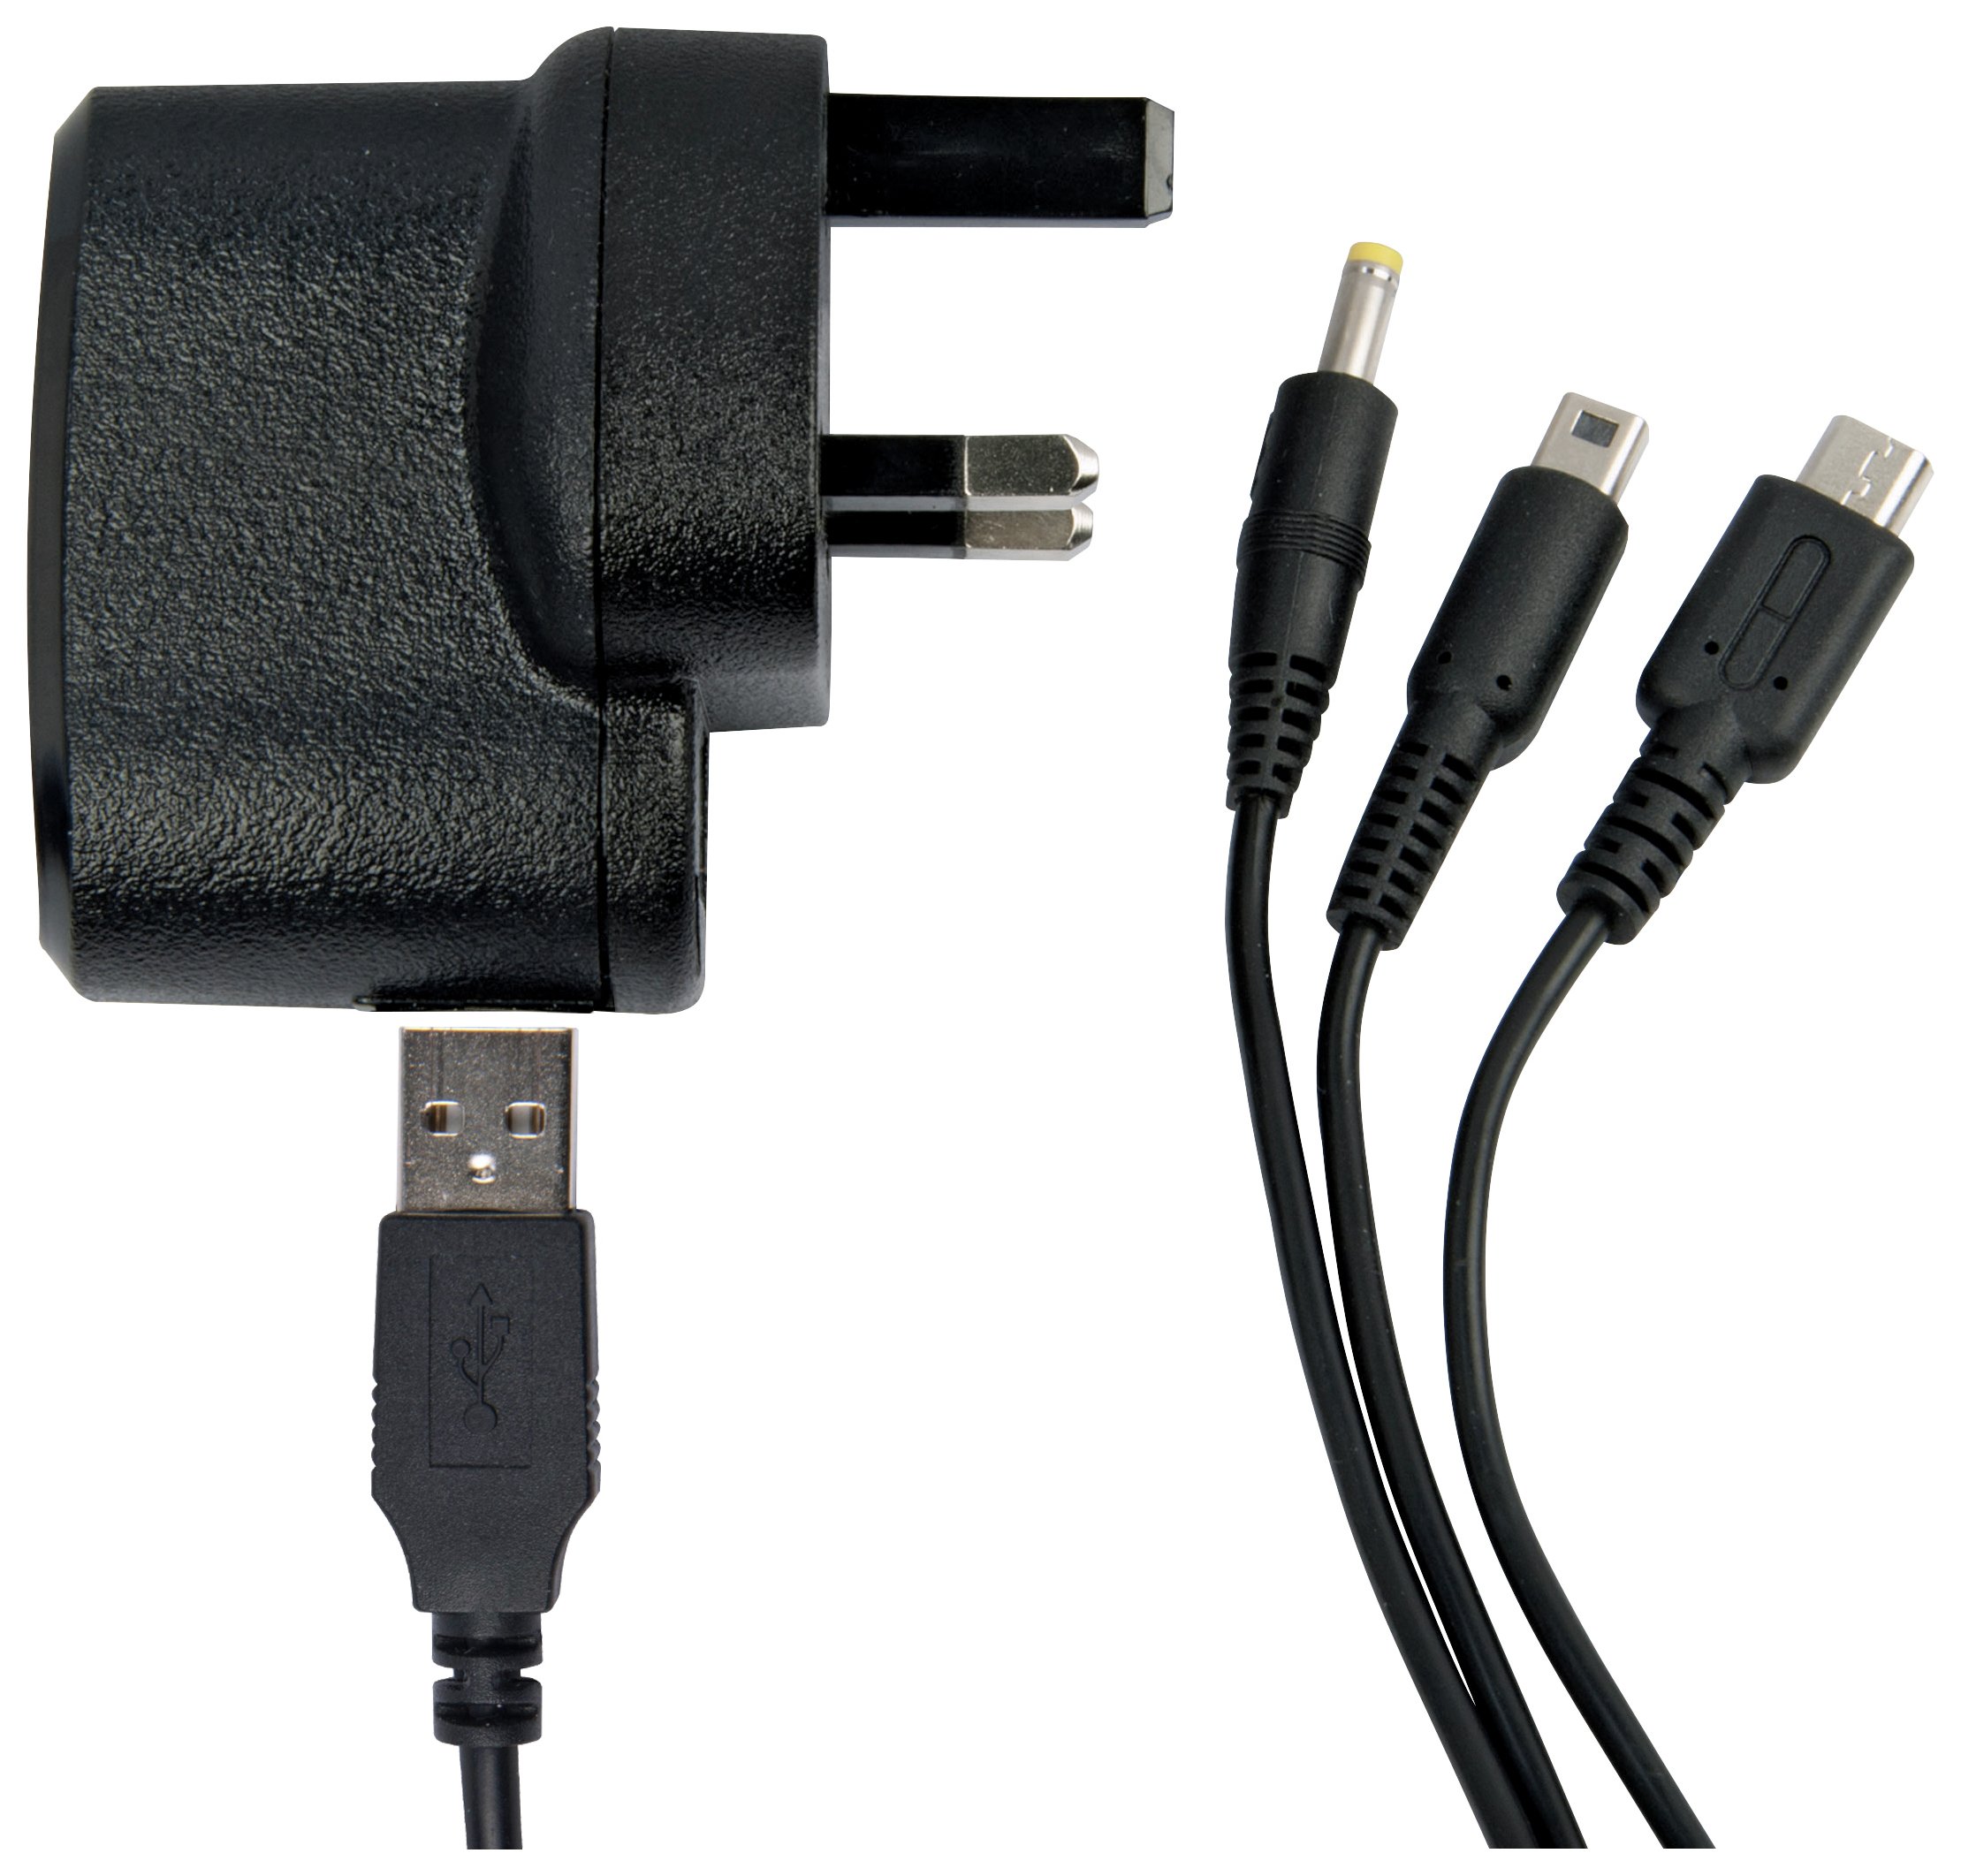 Nintendo 3DS Charger Review